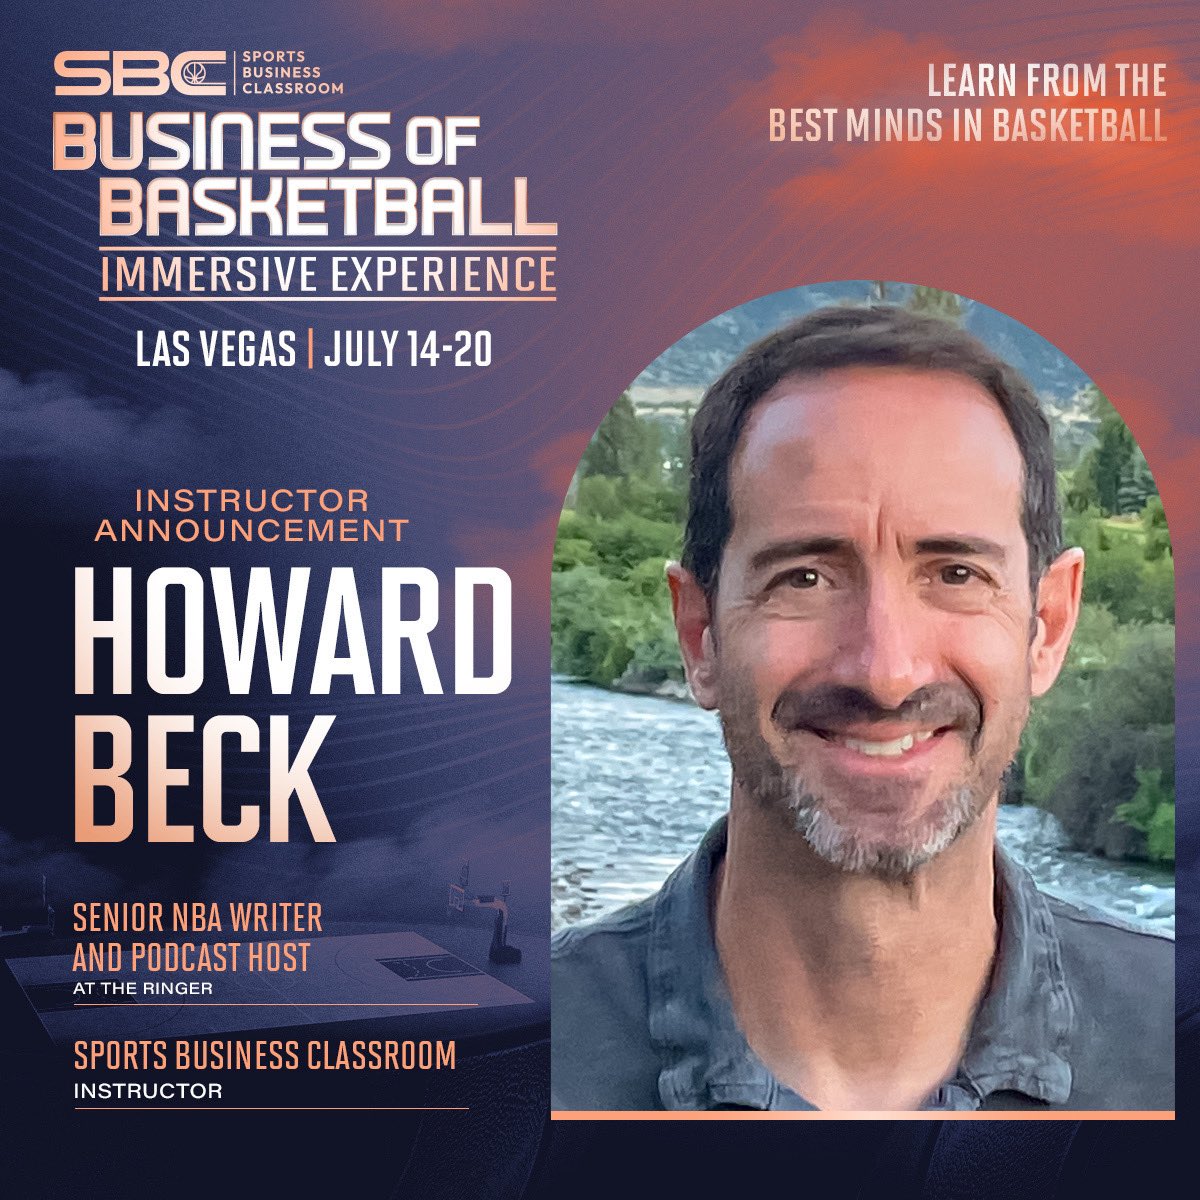 We’re excited to have @HowardBeck back for this year’s Business of Basketball Immersive Experience! A seasoned vet & an award-winning @NBA writer, Howard brings a wealth of knowledge & expertise to our program.🏀 Read the full story using the link below: sportsbusinessclassroom.com/award-winning-…